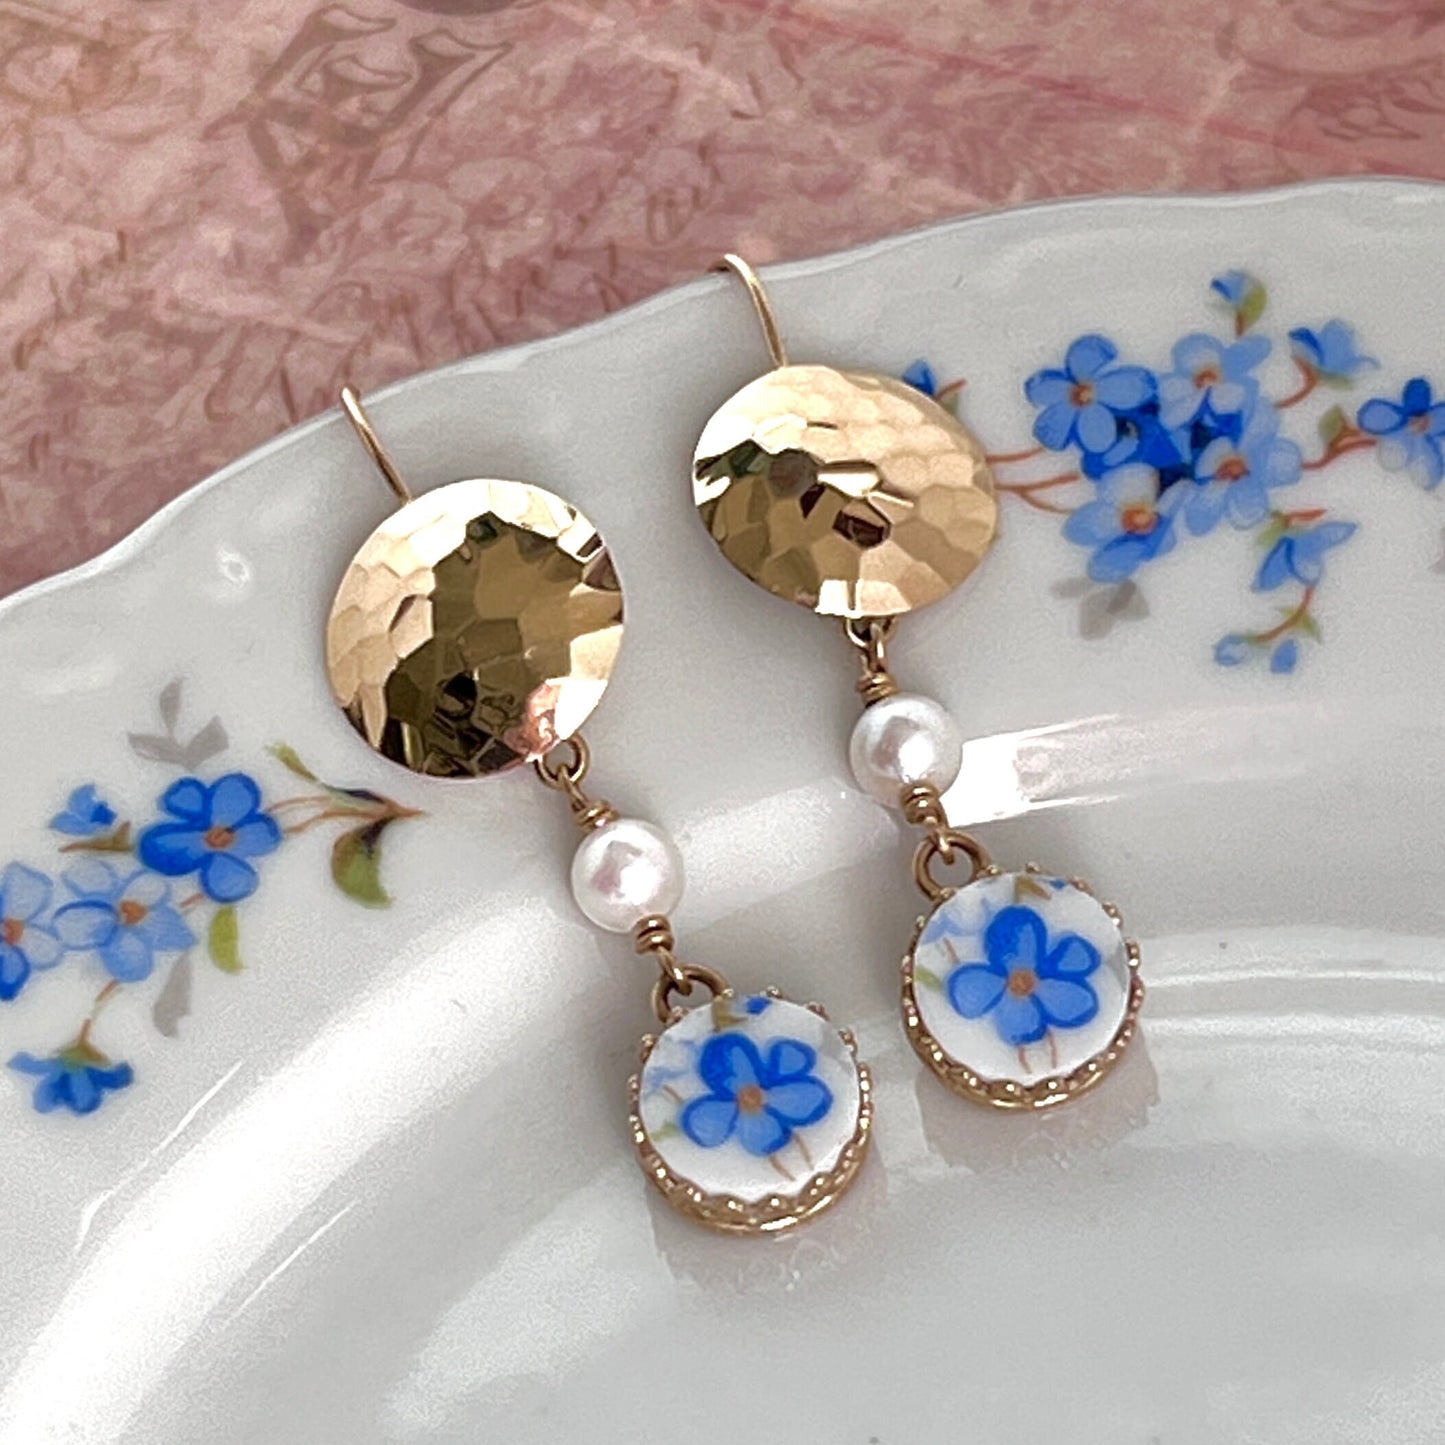 14k Solid Gold Forget Me Not Earrings, Hammered Gold, Broken China Jewelry, 20th Anniversary Gift for Wife